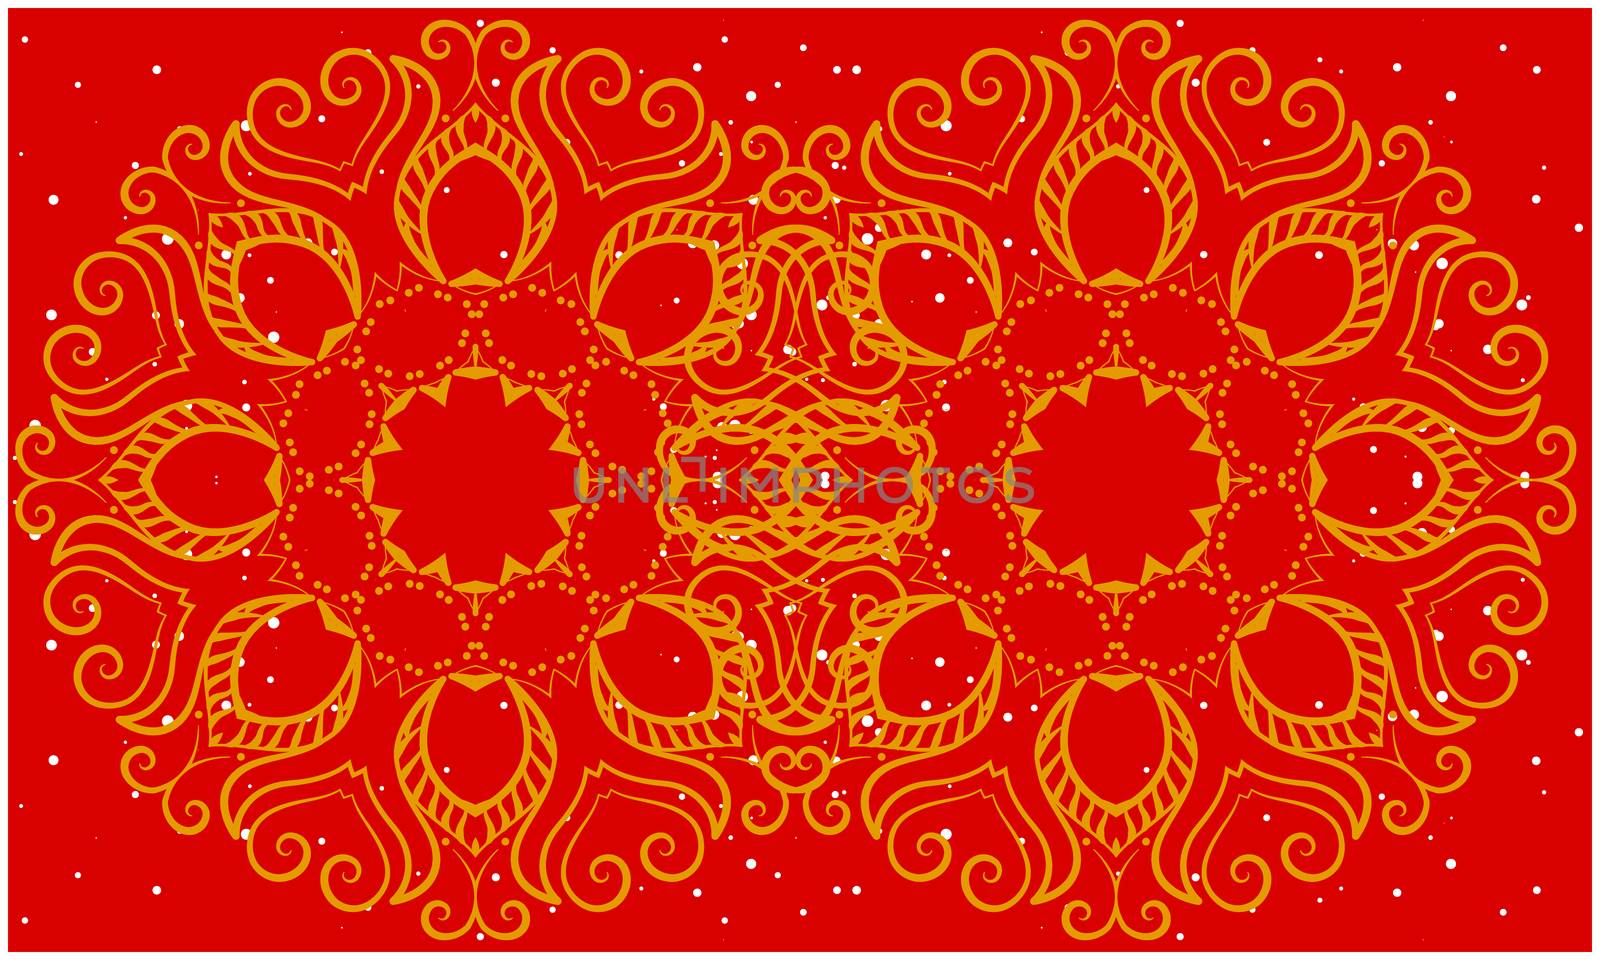 gold design art on abstract red background by aanavcreationsplus